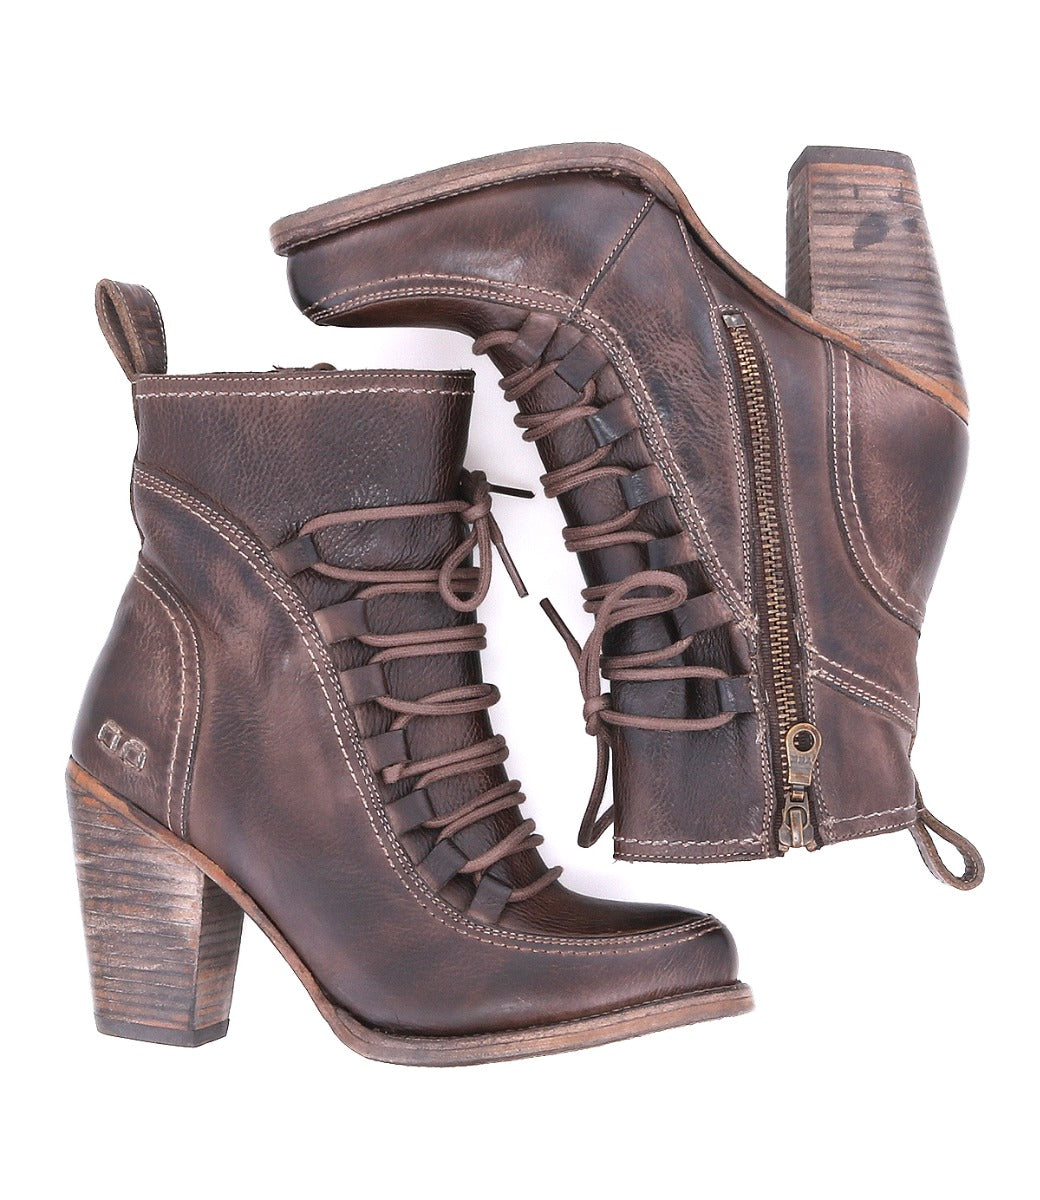 A pair of Bed Stu Izetta women's brown leather ankle boots.